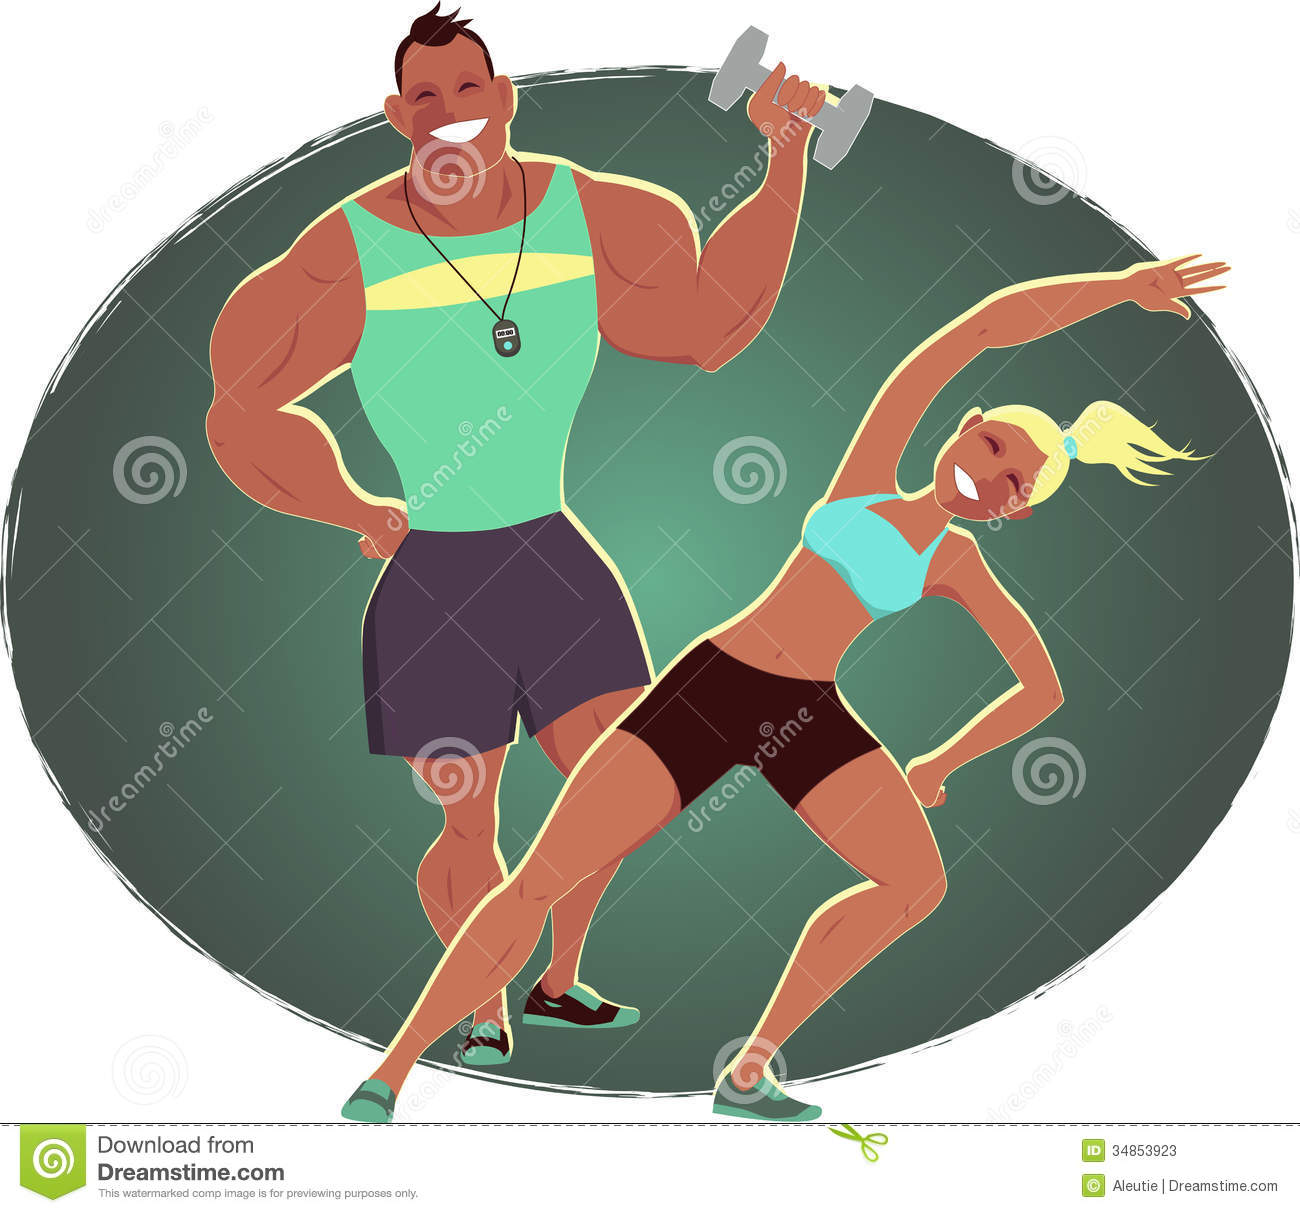 Fitness Instructor And Personal Trainer Stock Photos   Image  34853923